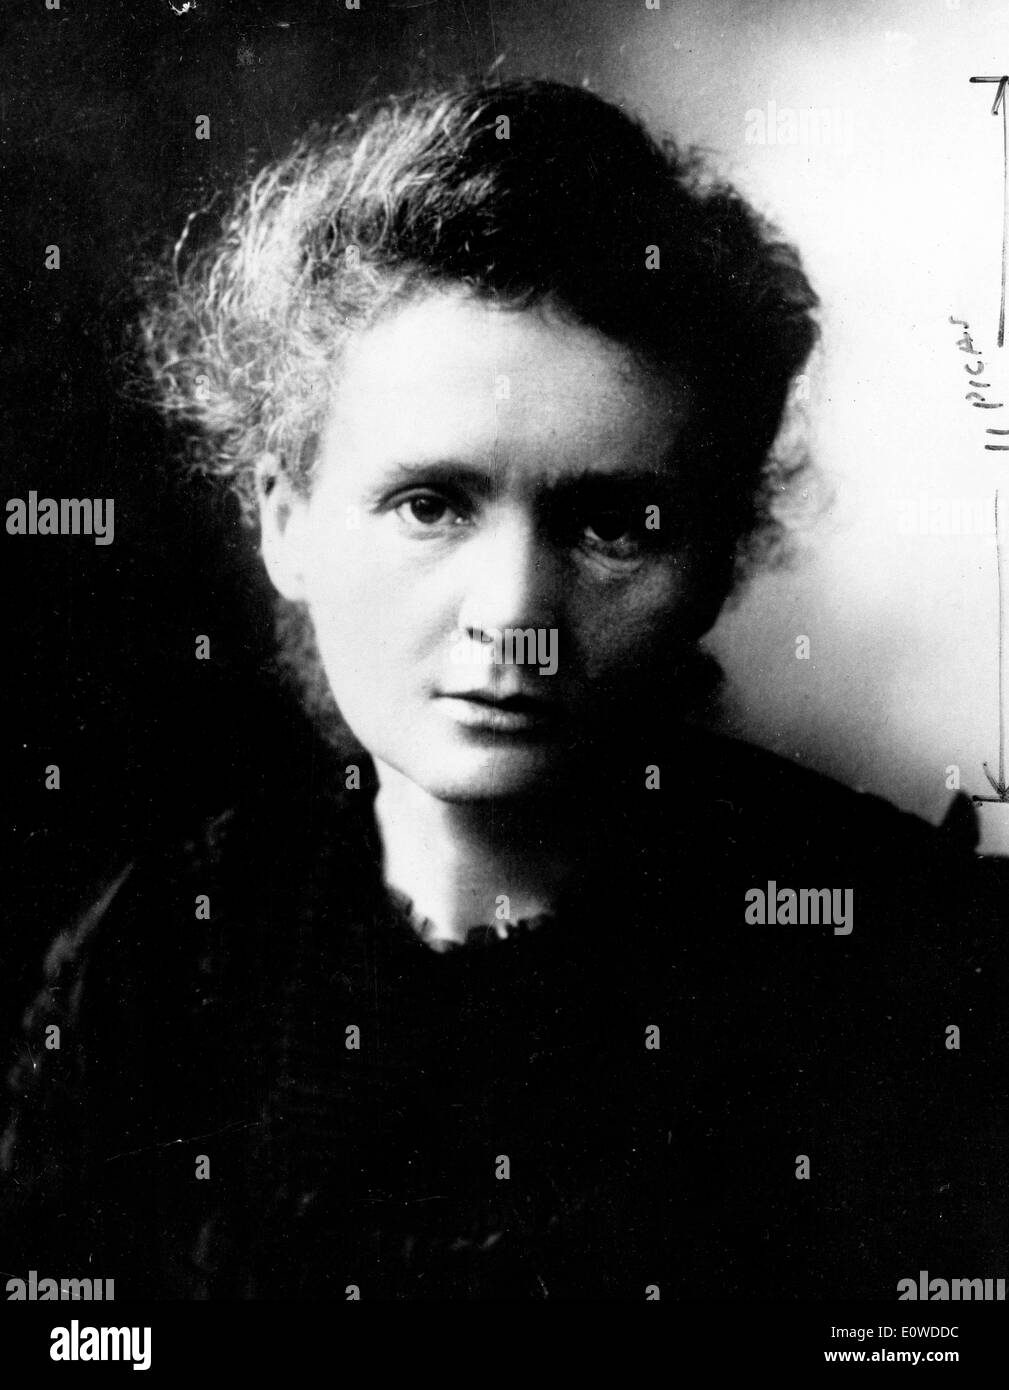 MARIE-CURIE- Stockfoto